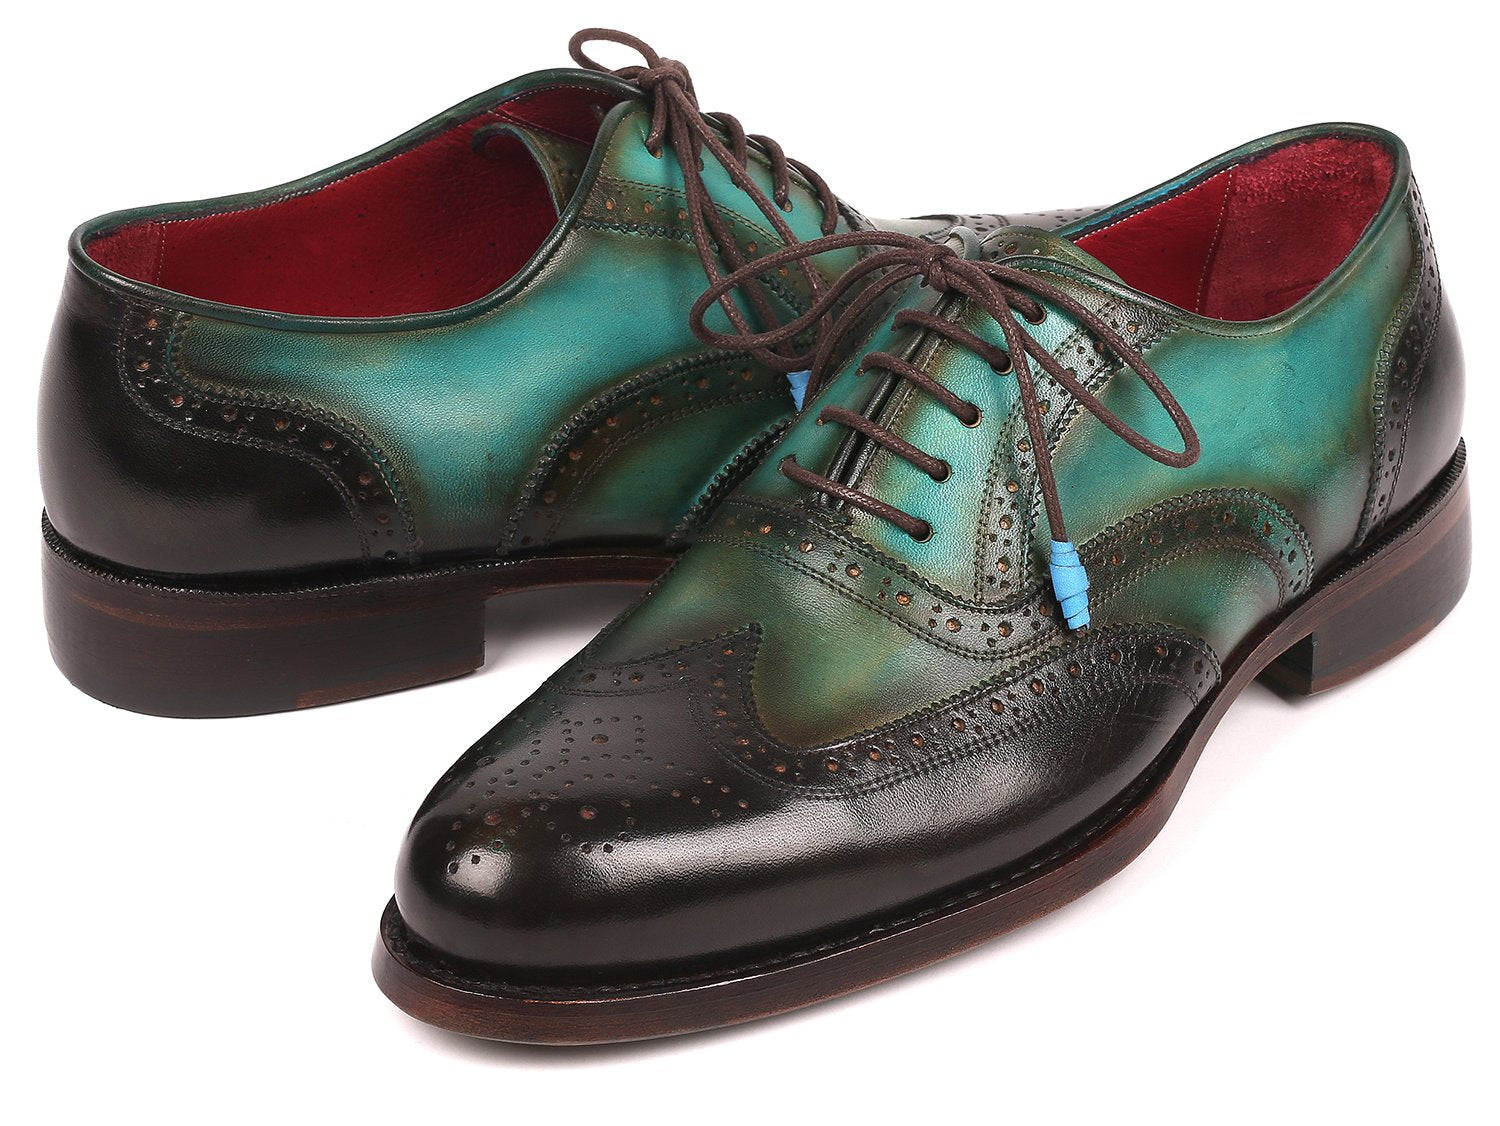 Paul Parkman Brown & Green Wingtip Oxfords Goodyear Welted - 027-BRWGRN